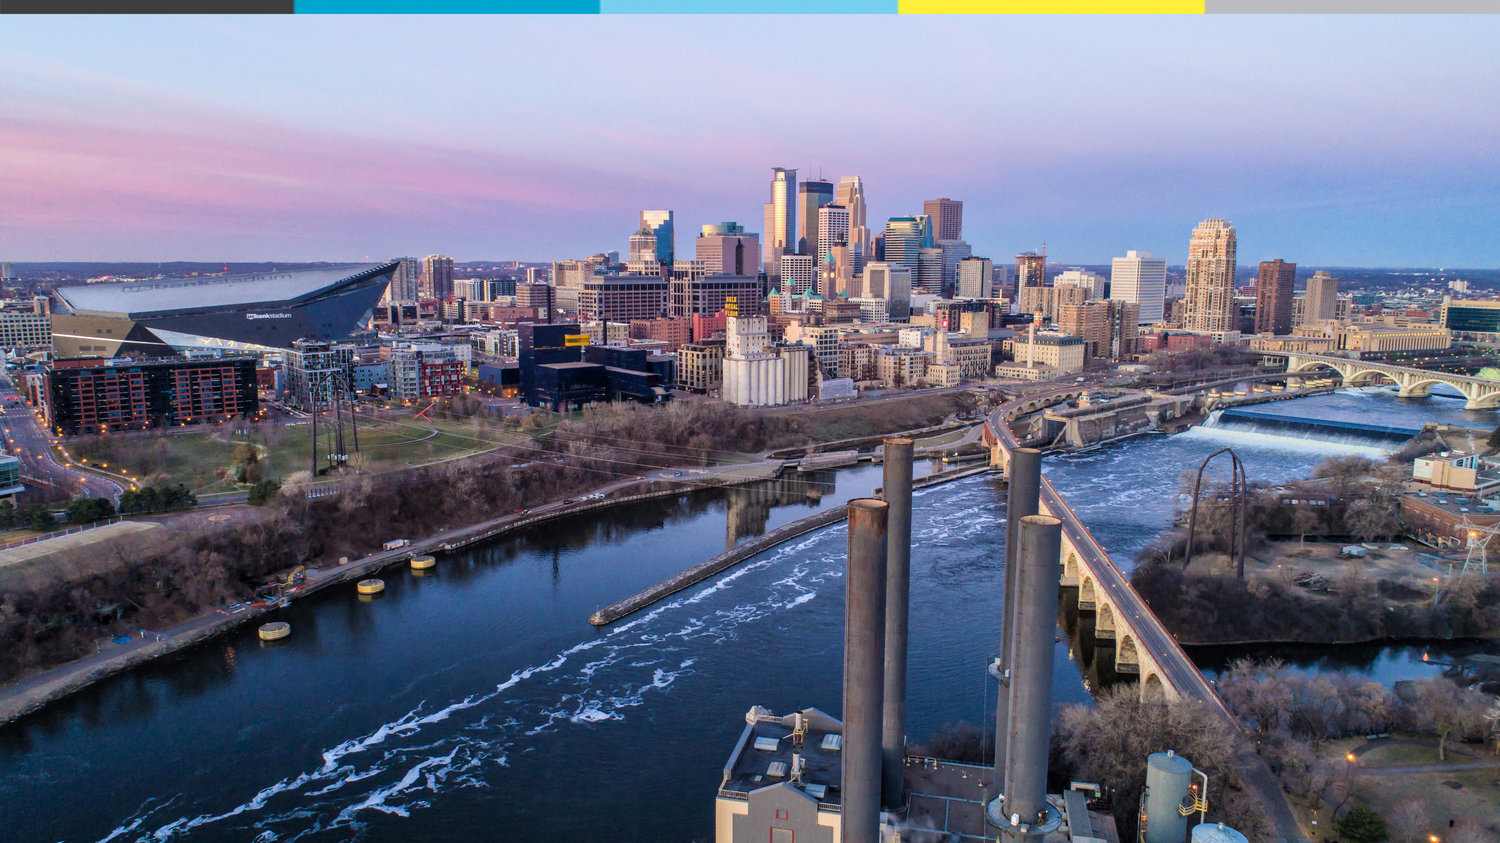 The city of Minneapolis is highlighted like never before with a behind-the-scenes look through Doors Open Minneapolis